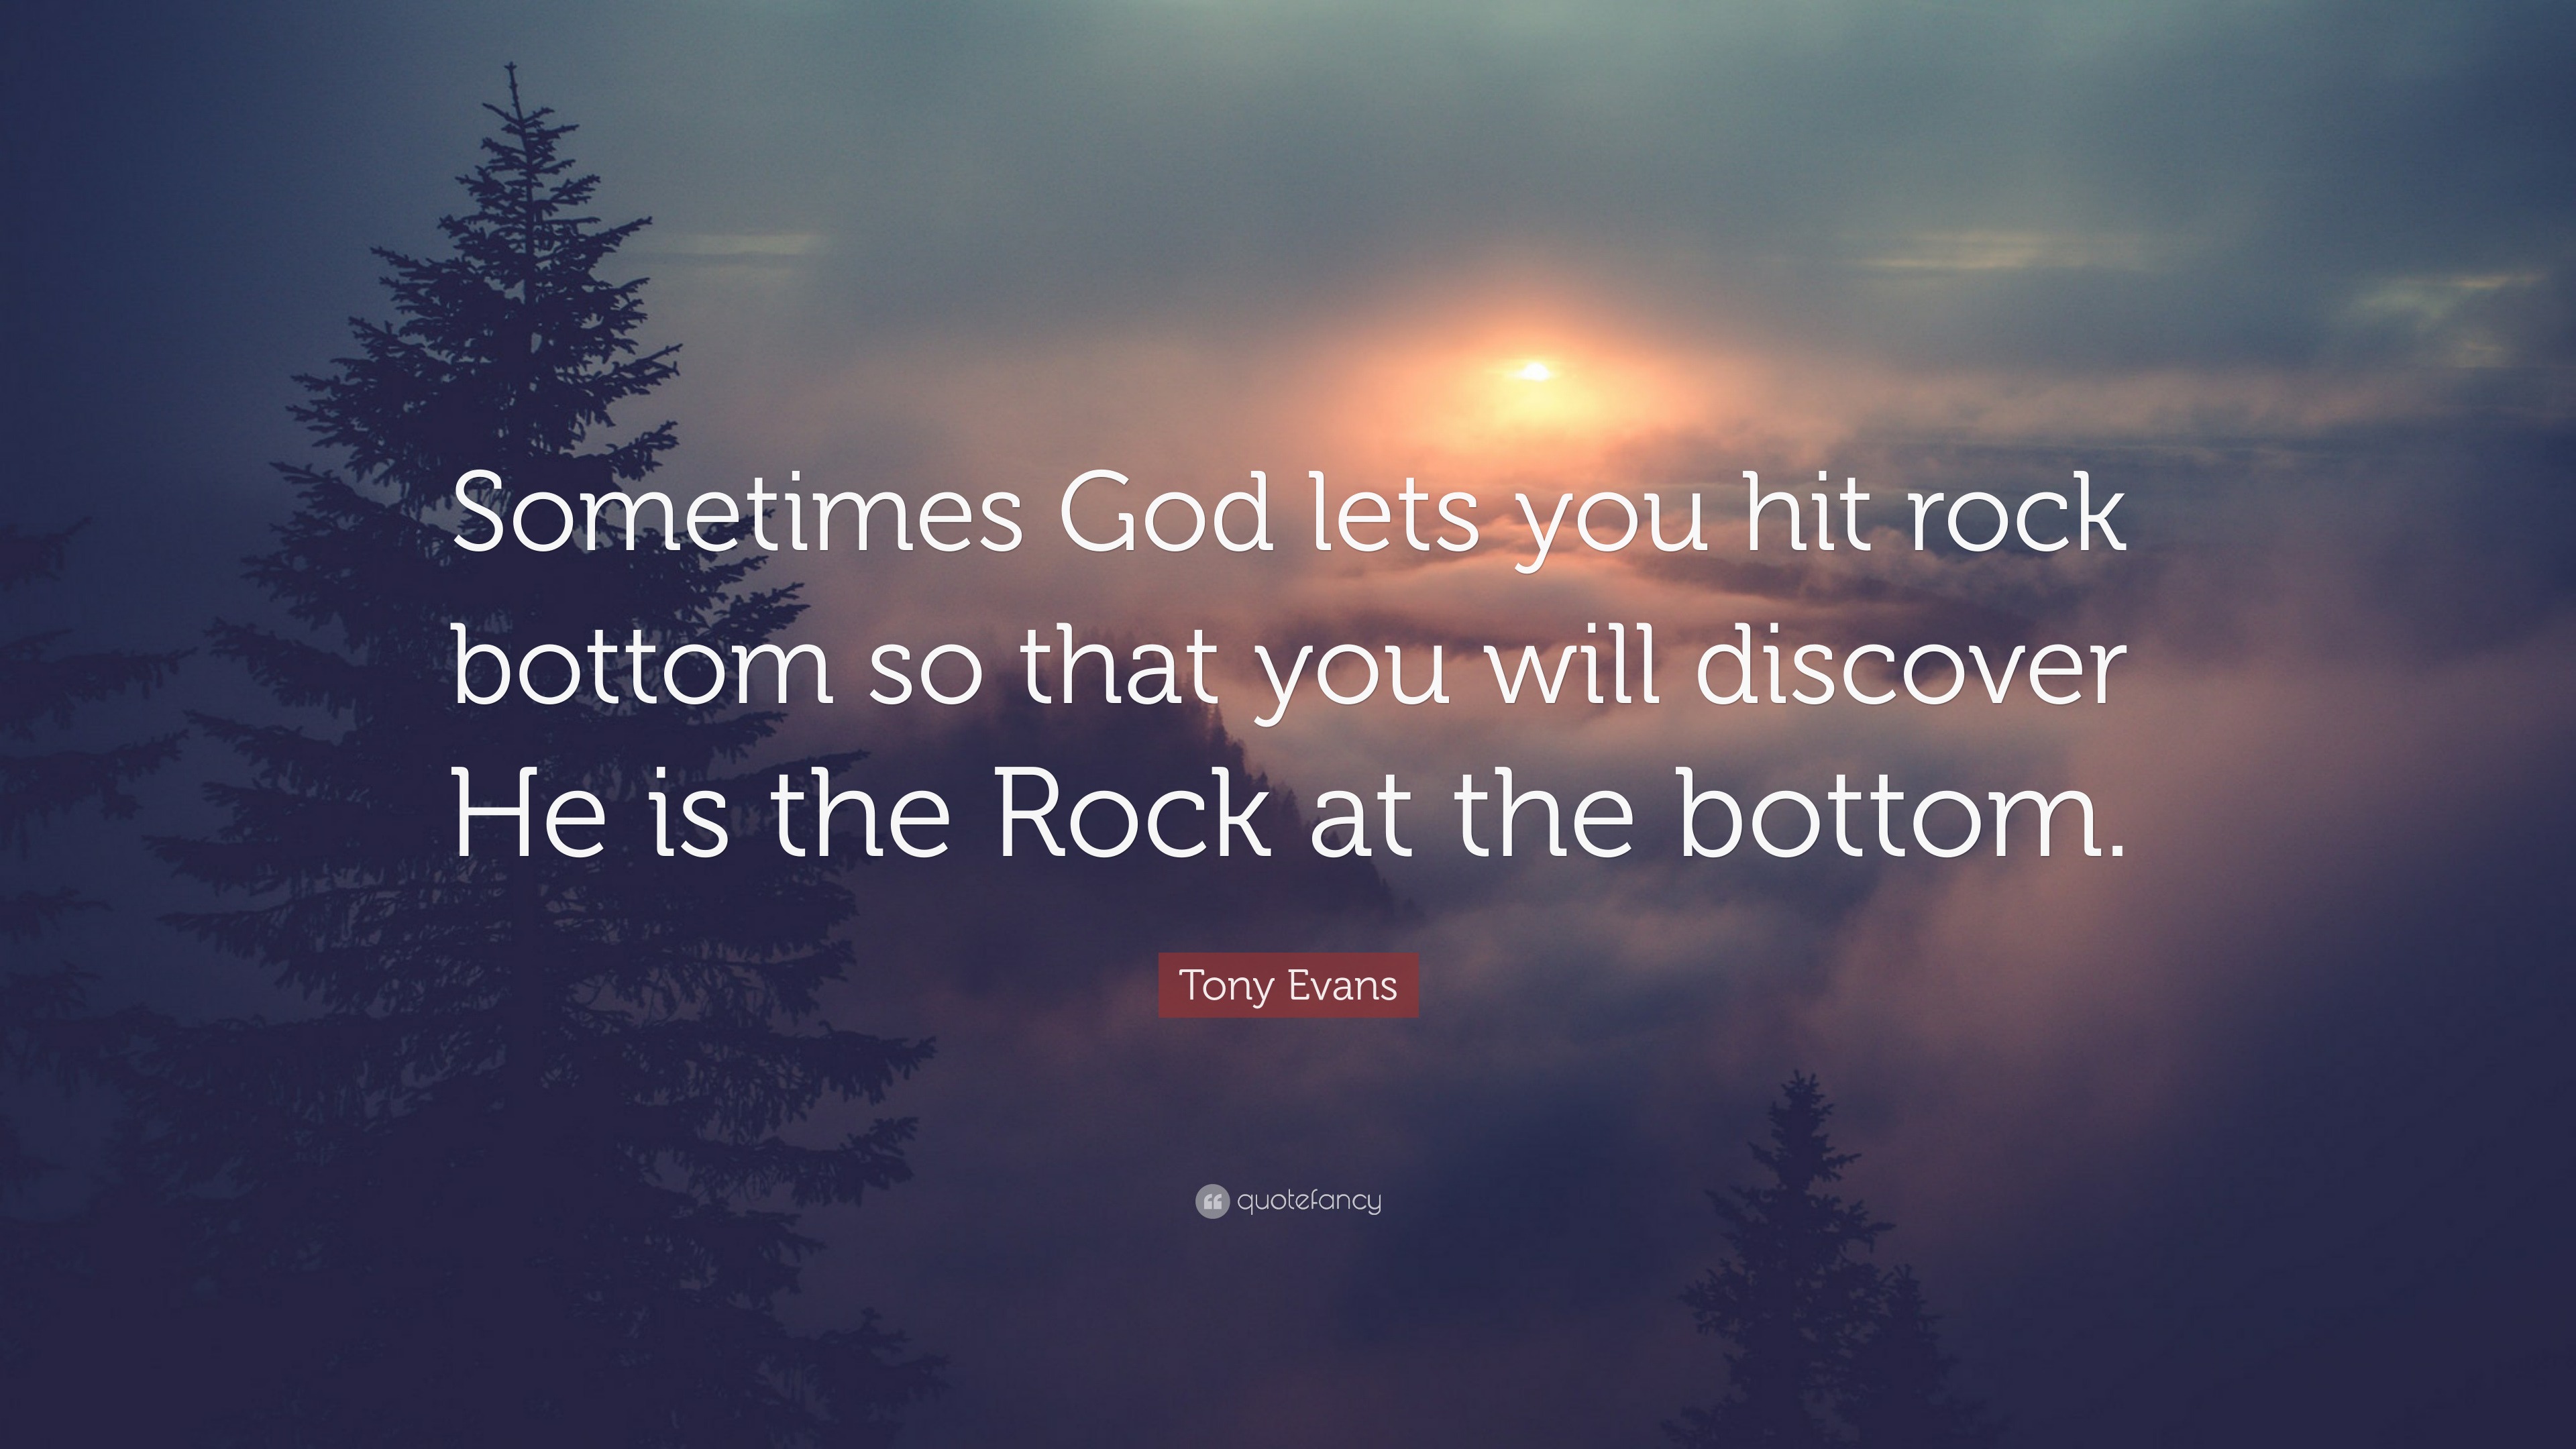 Tony Evans Quote: “Sometimes God lets you hit rock bottom so that you